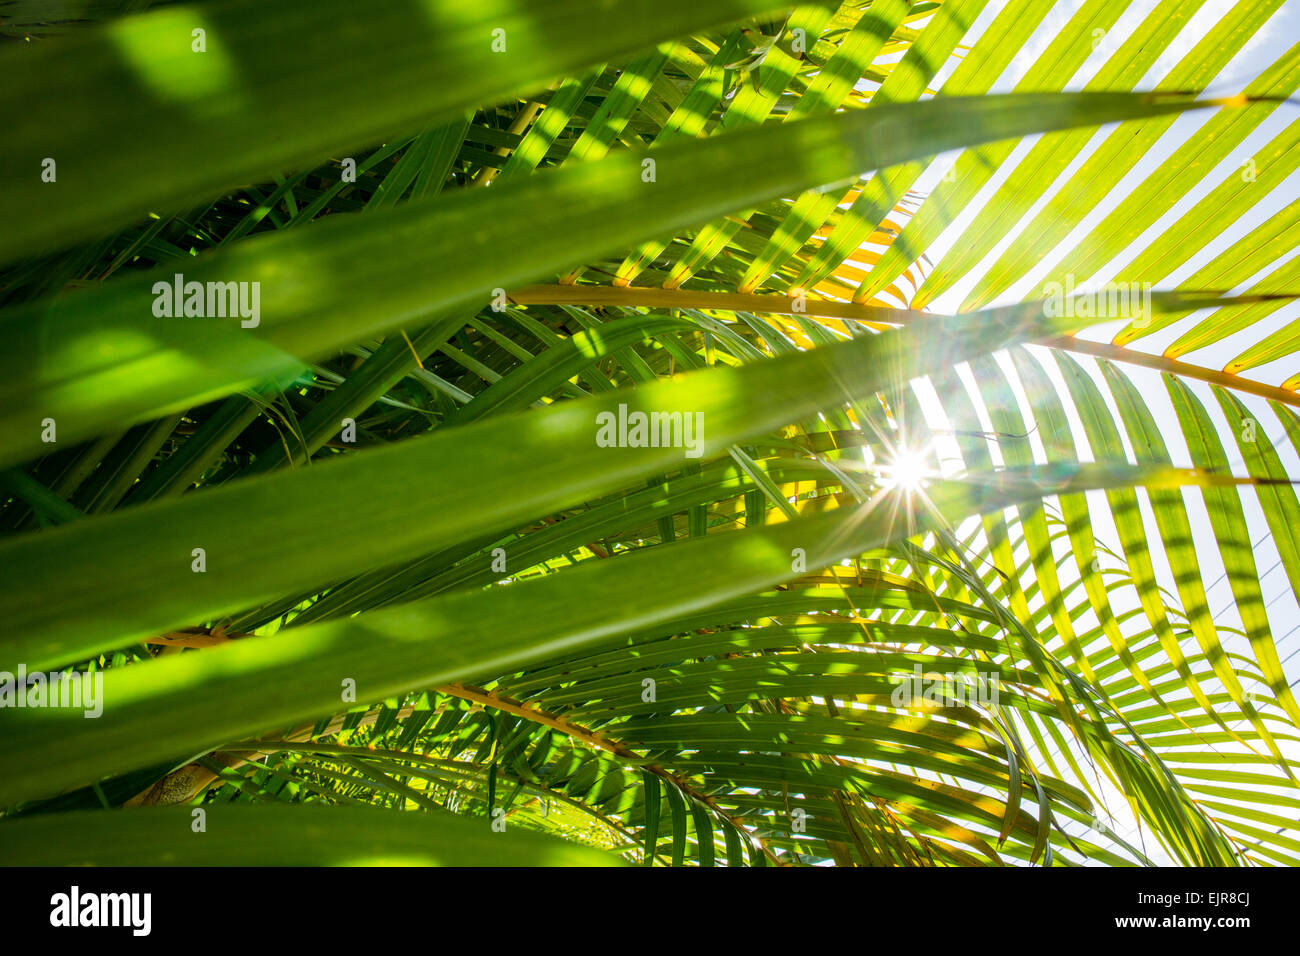 Low angle view of sun shining through palm fronds Stock Photo